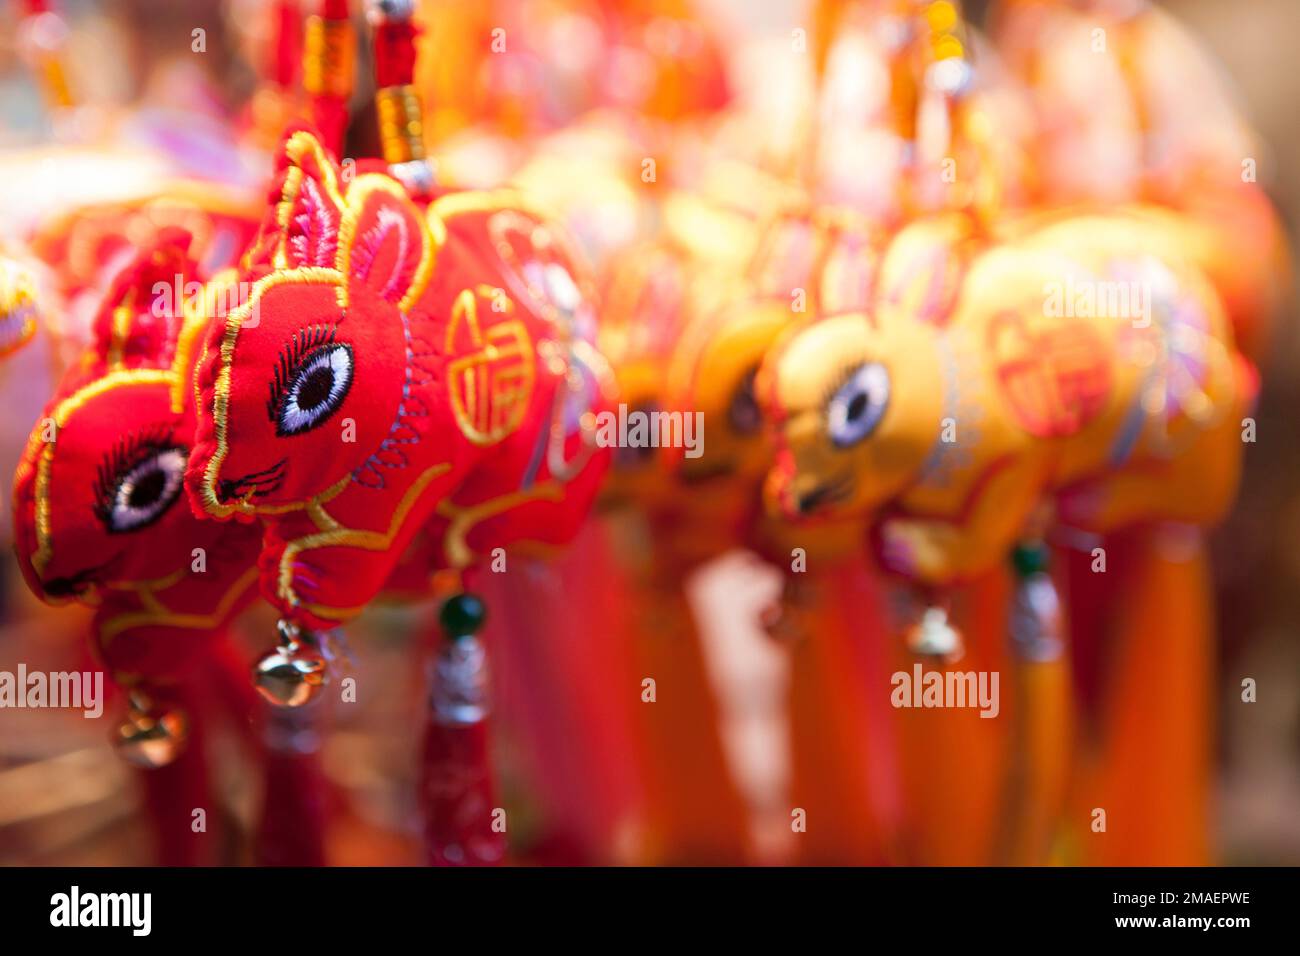 London, UK, 19 January 2023: Lucky rabbit souvenirs for sale in Chinatown. The Chinese Year of the Rabbit begins on Sunday 22nd January. Anna Watson/Alamy Live News Stock Photo